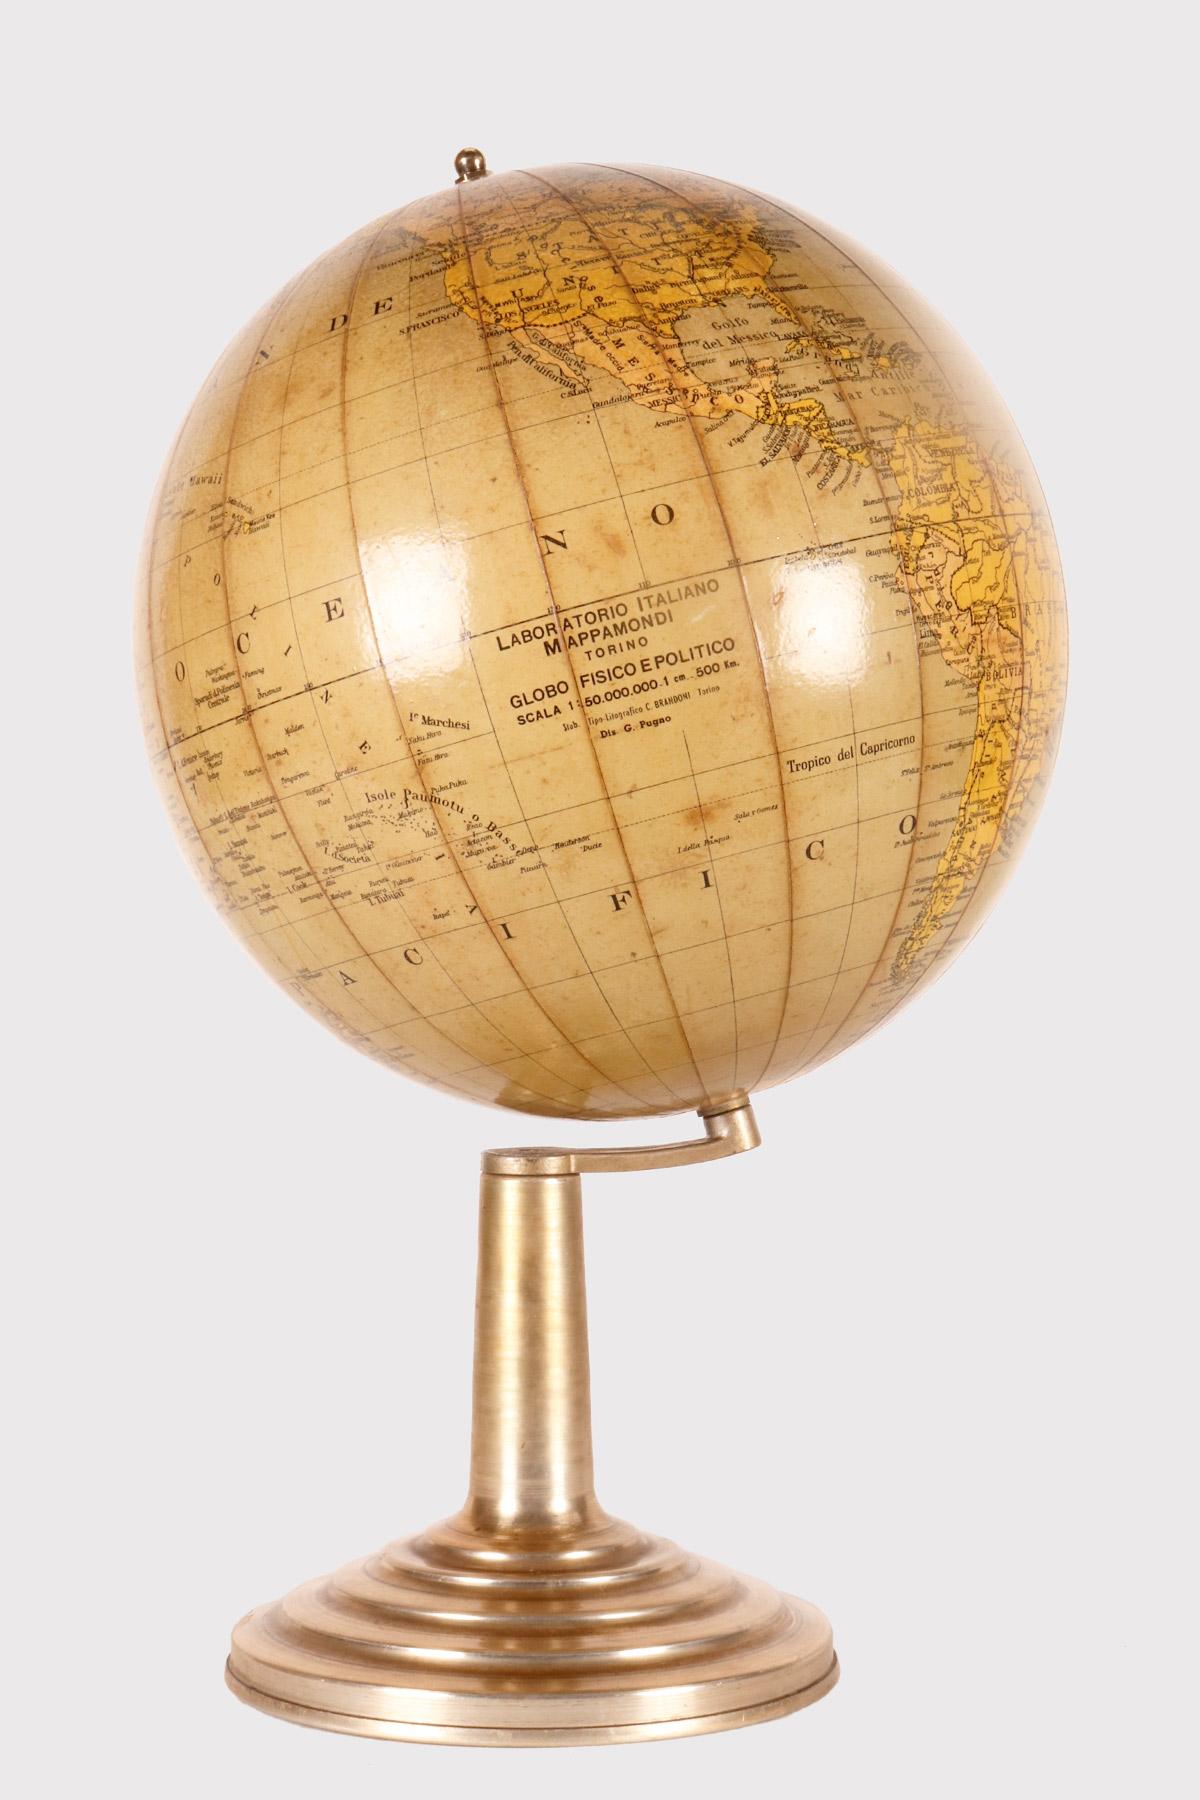 Terrestrial globe, physical and political, in paper mache on a round metal base. Cartographic design G. Pugno, lithographic typography C. Brandoni. Italian globe laboratory, Turin, Italy before 1945.